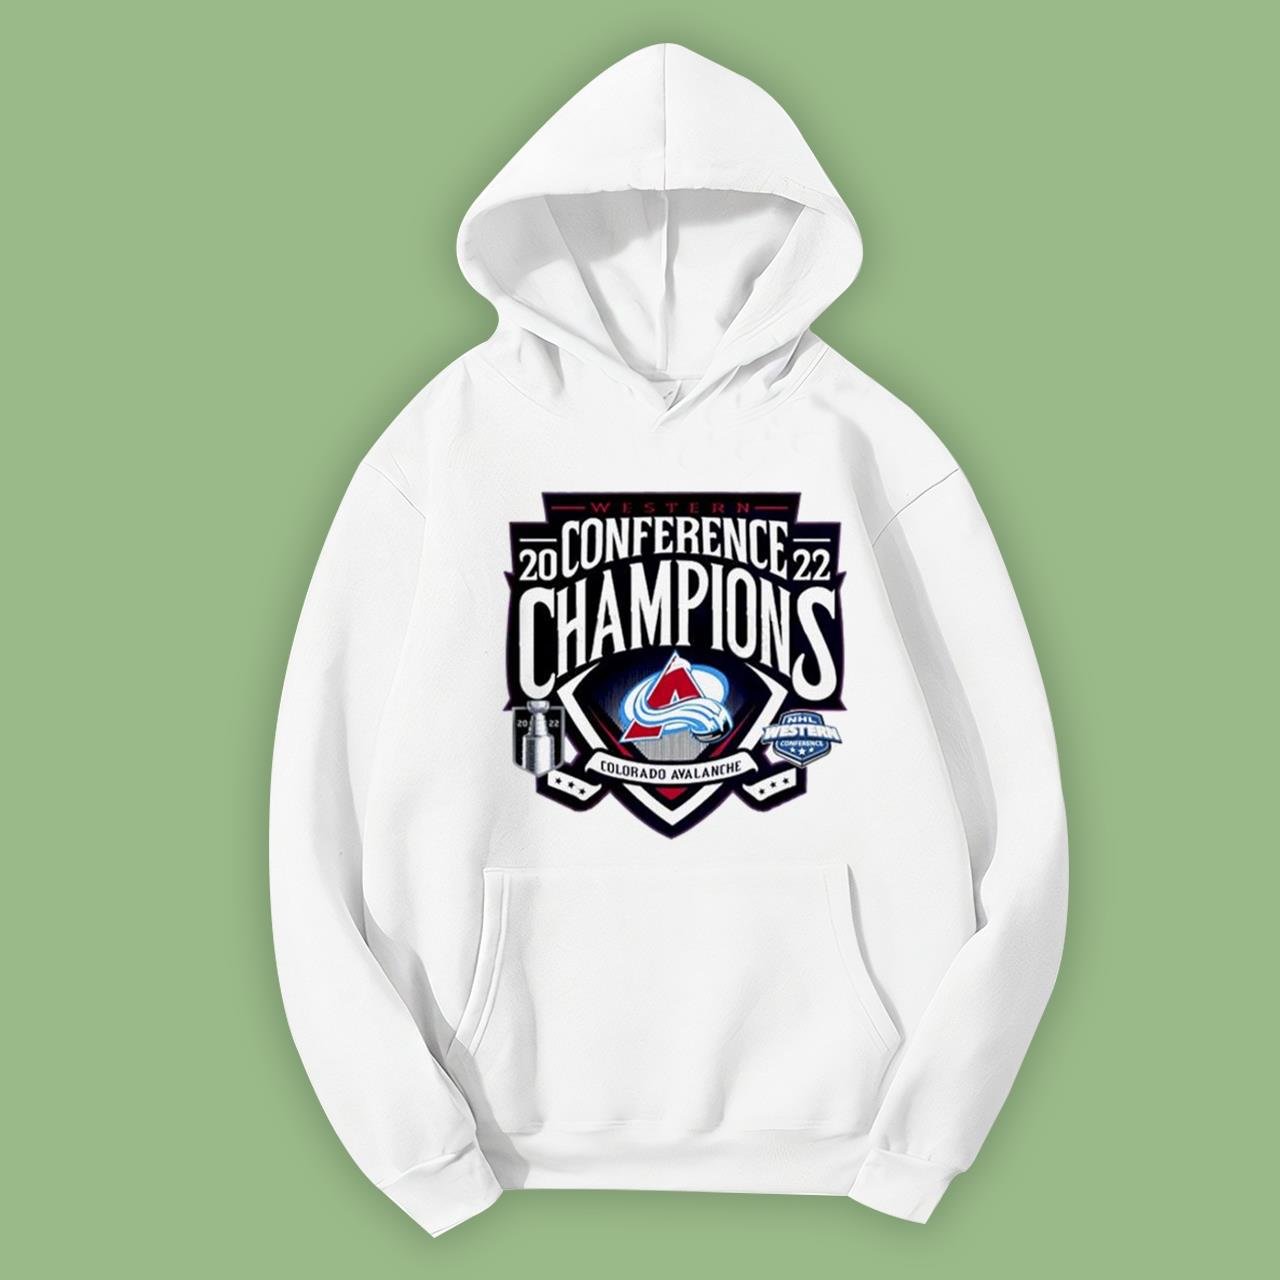 Wistern 2022 Conference Champions Colorado Avalanche Shirt